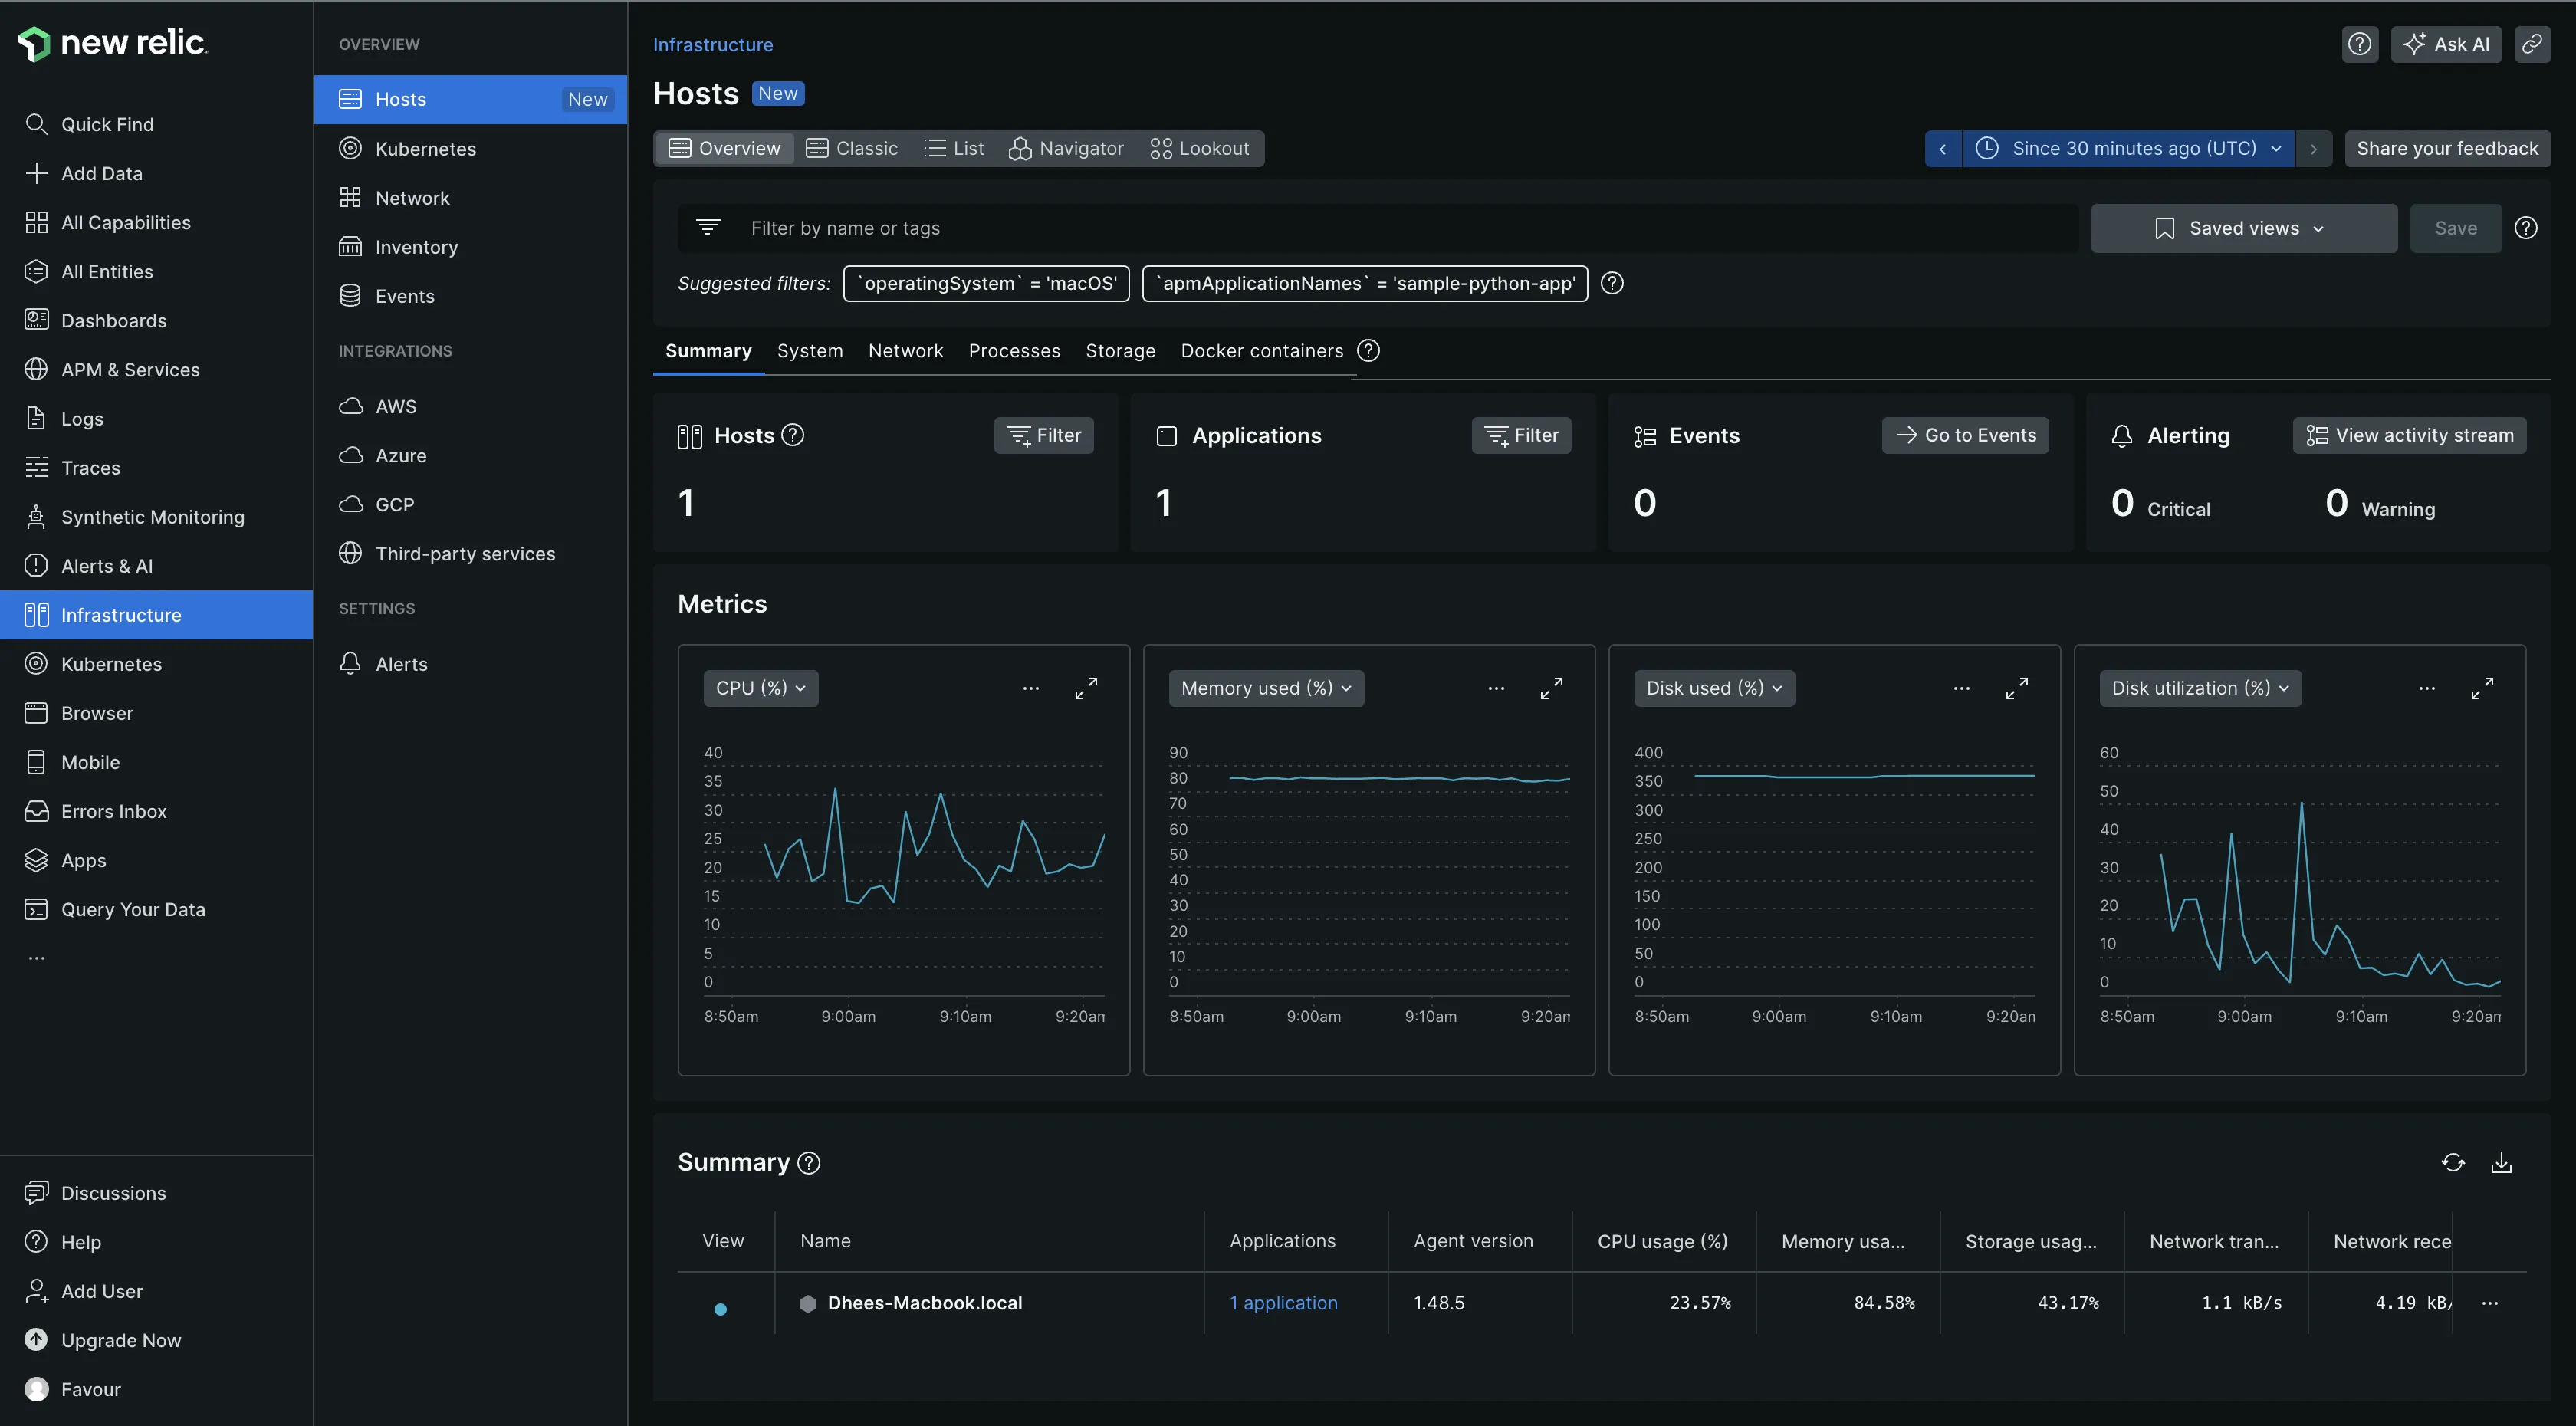 Infrastructure monitoring on New Relic